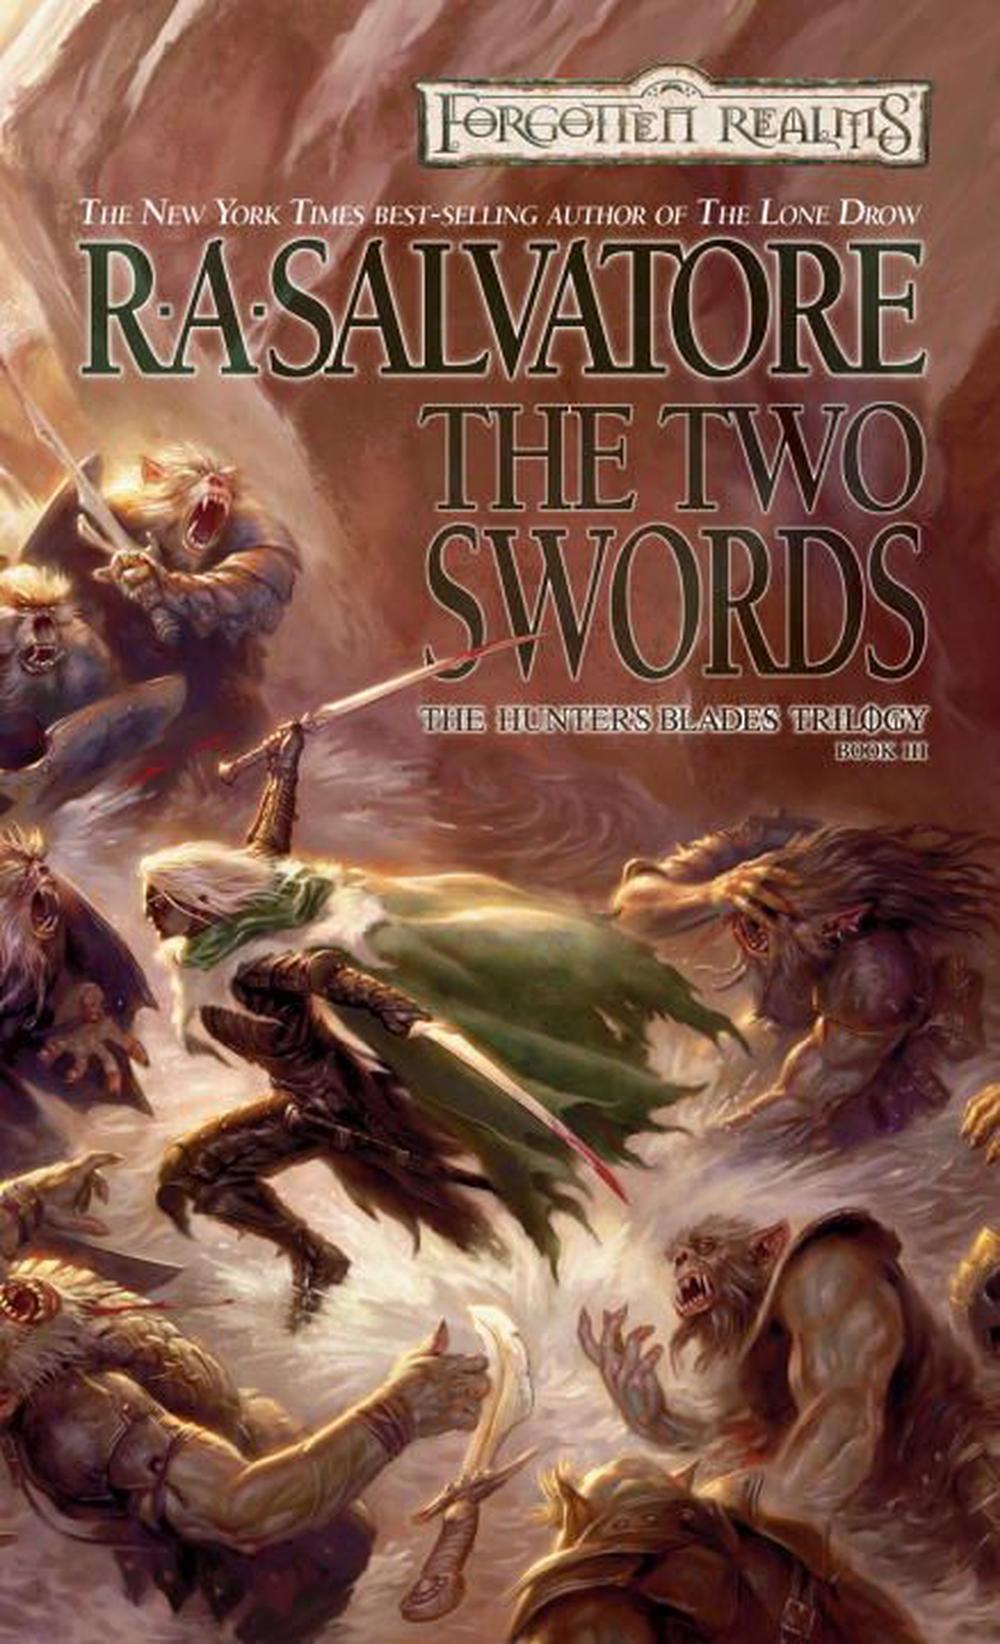 The Two Swords The Hunters Blades Trilogy, Book III by R.A. Salvatore